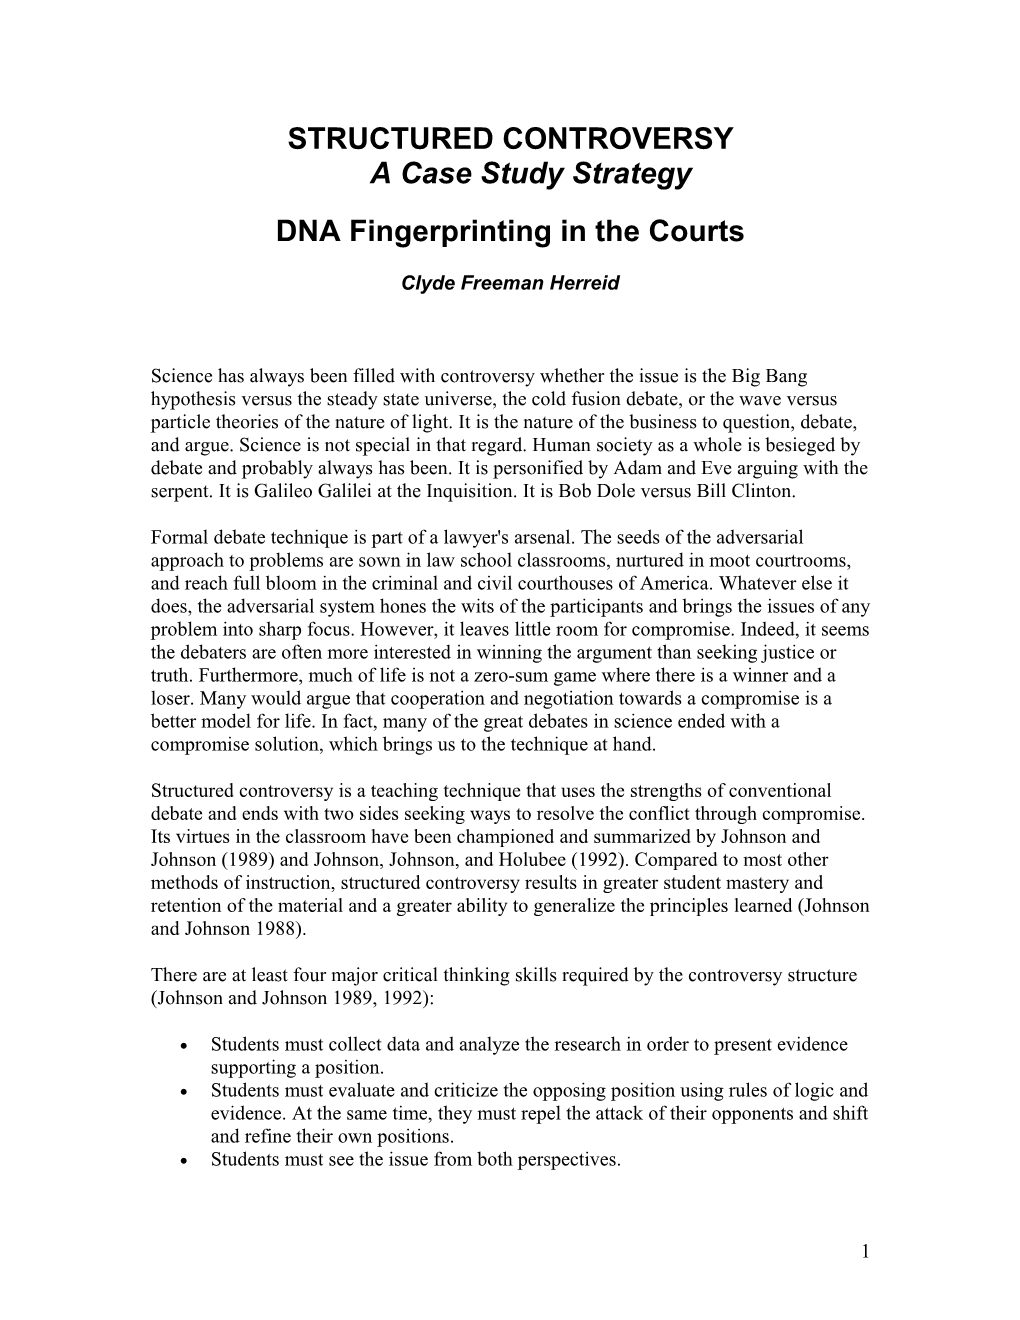 STRUCTURED CONTROVERSYA Case Study Strategy